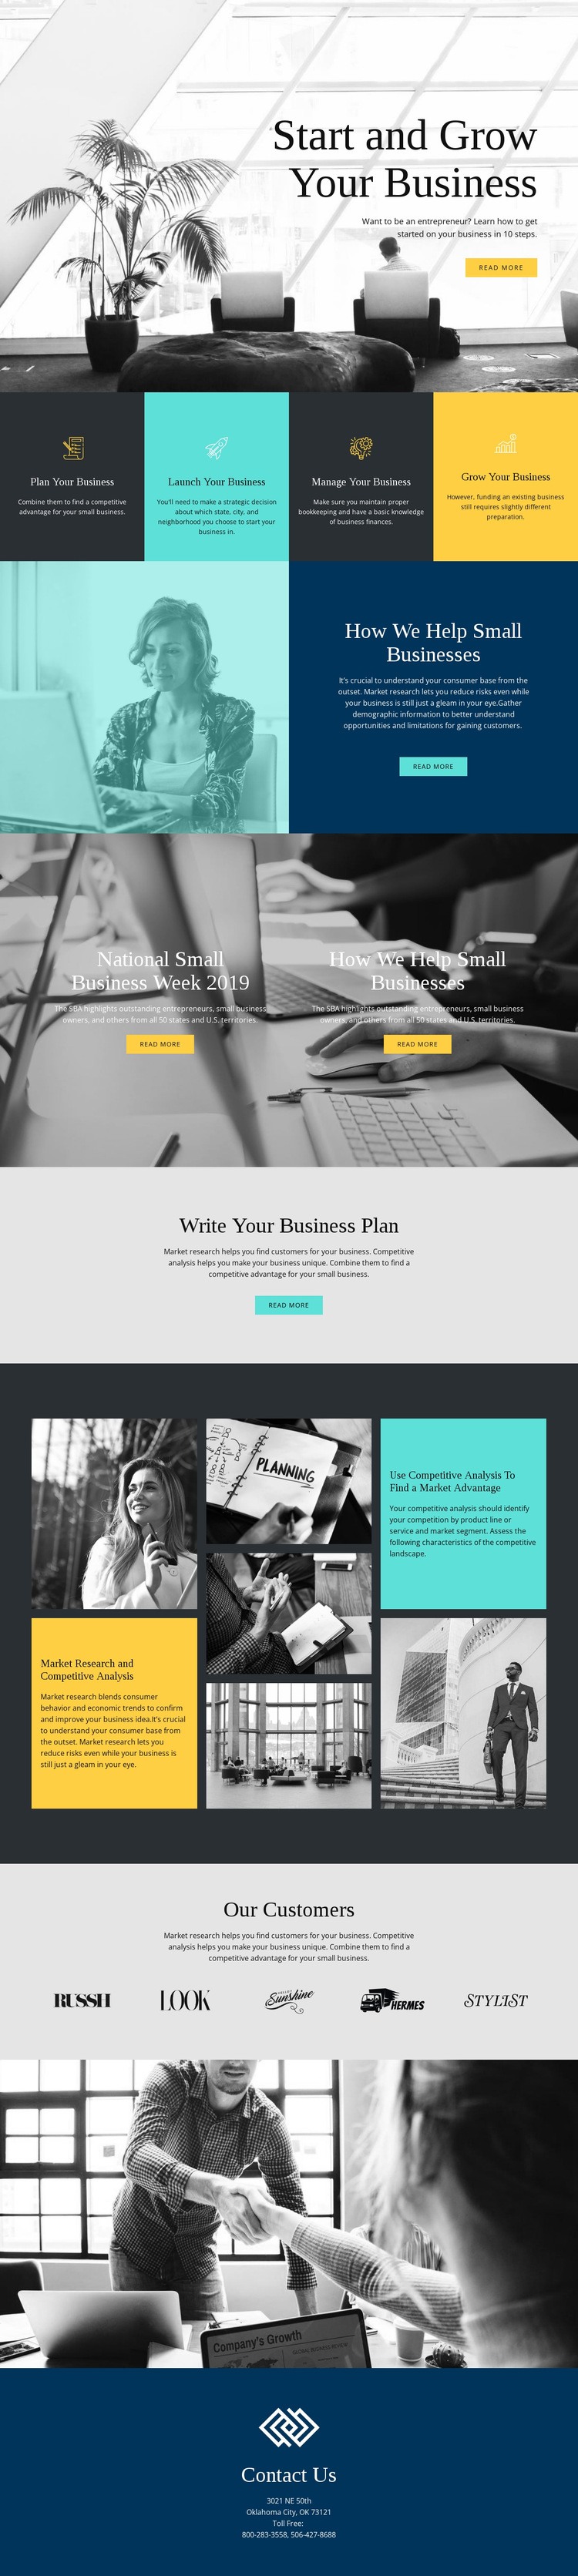 Start and grow your business Website Template